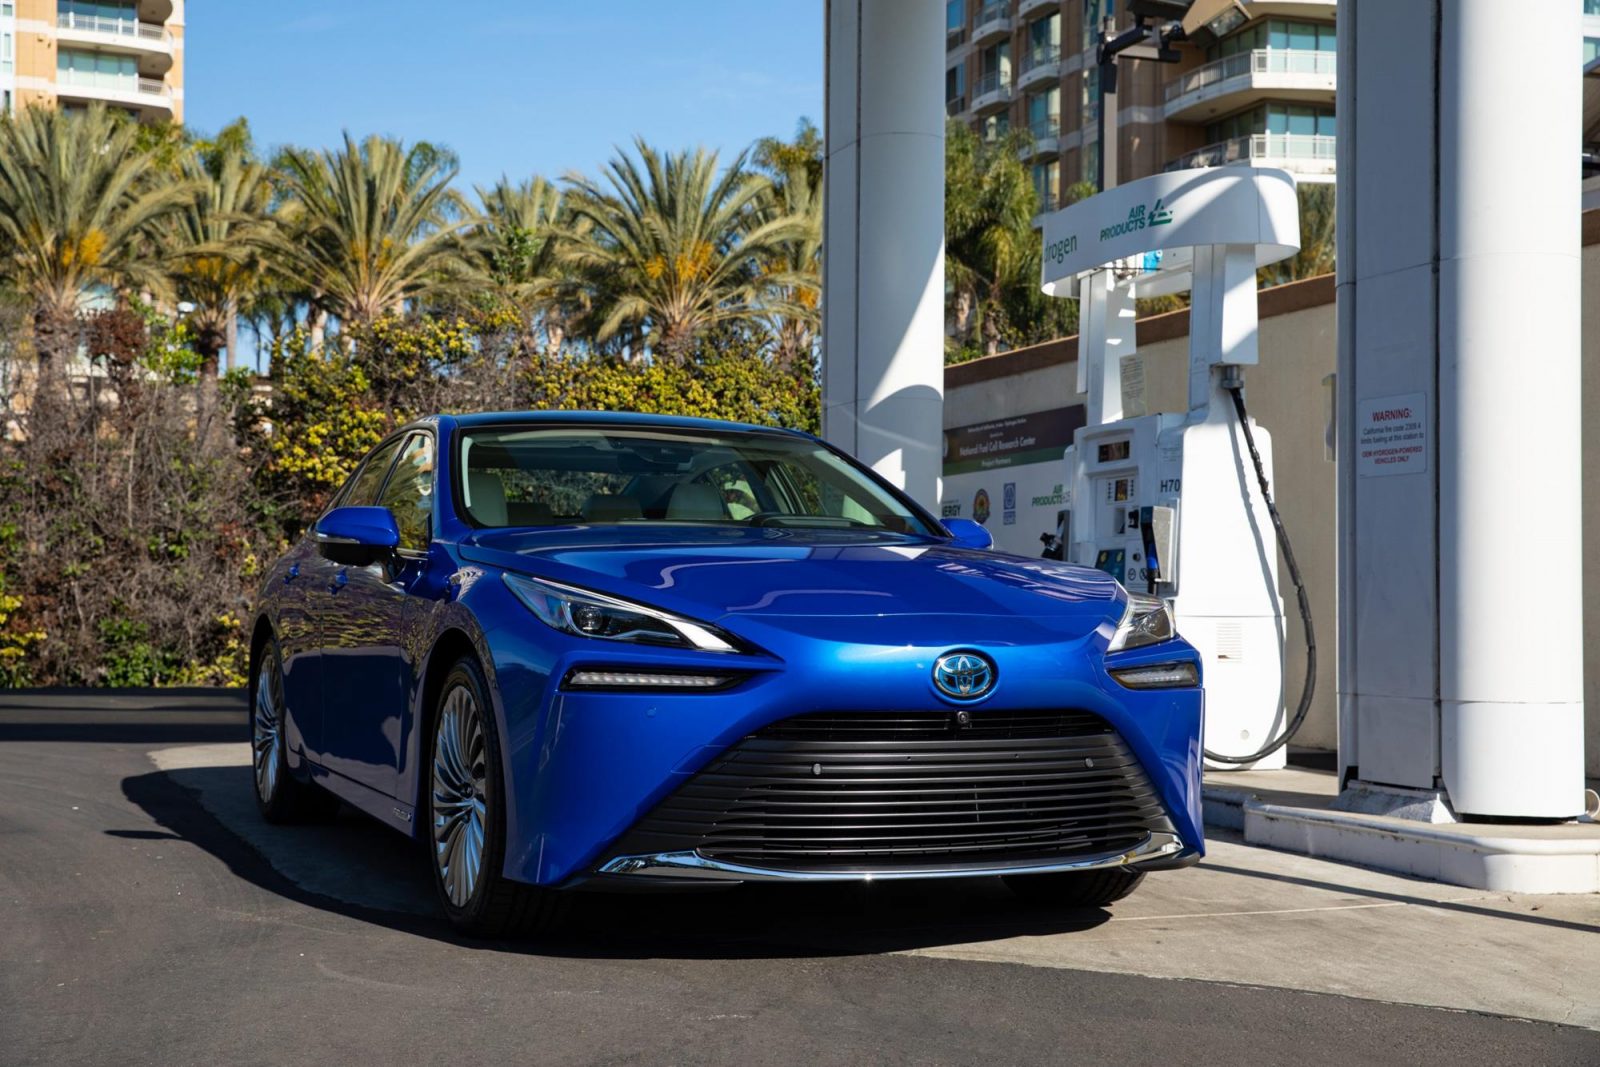 Toyota Introduces SecondGeneration Mirai Fuel Cell Electric Vehicle CarNewsCafe